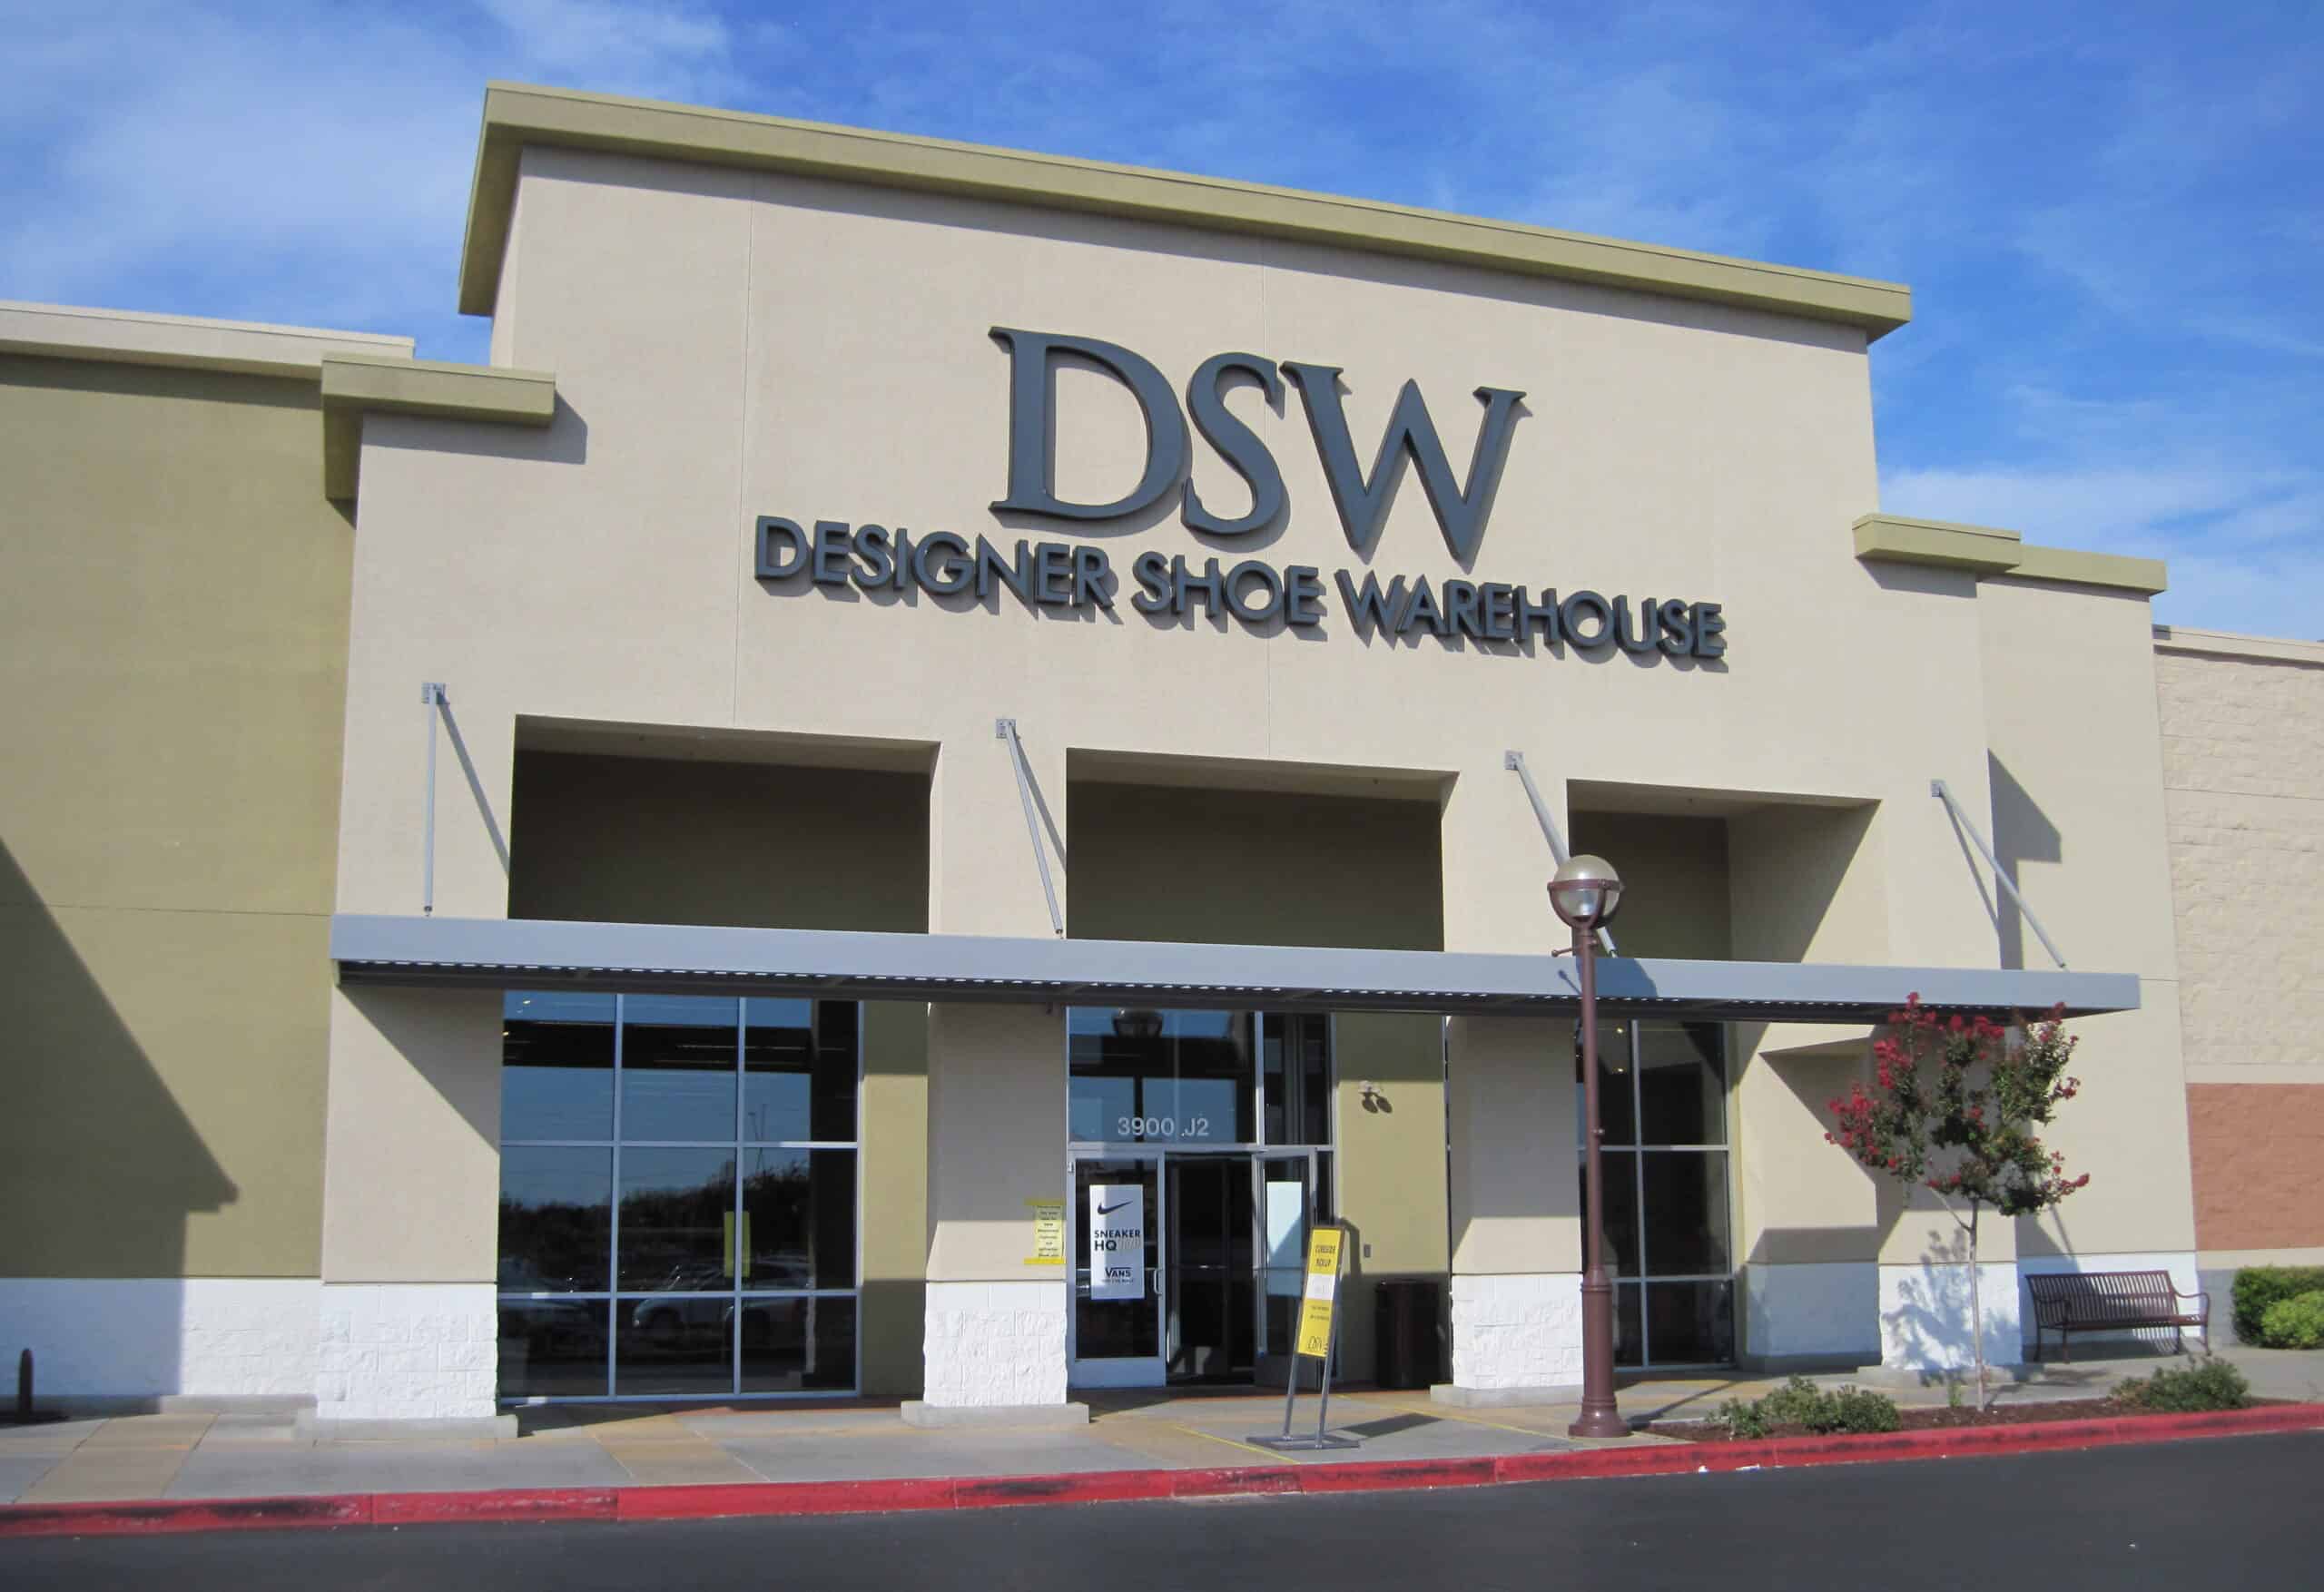 How do discount stores like Ross, Marshalls, TJ Maxx, DSW get